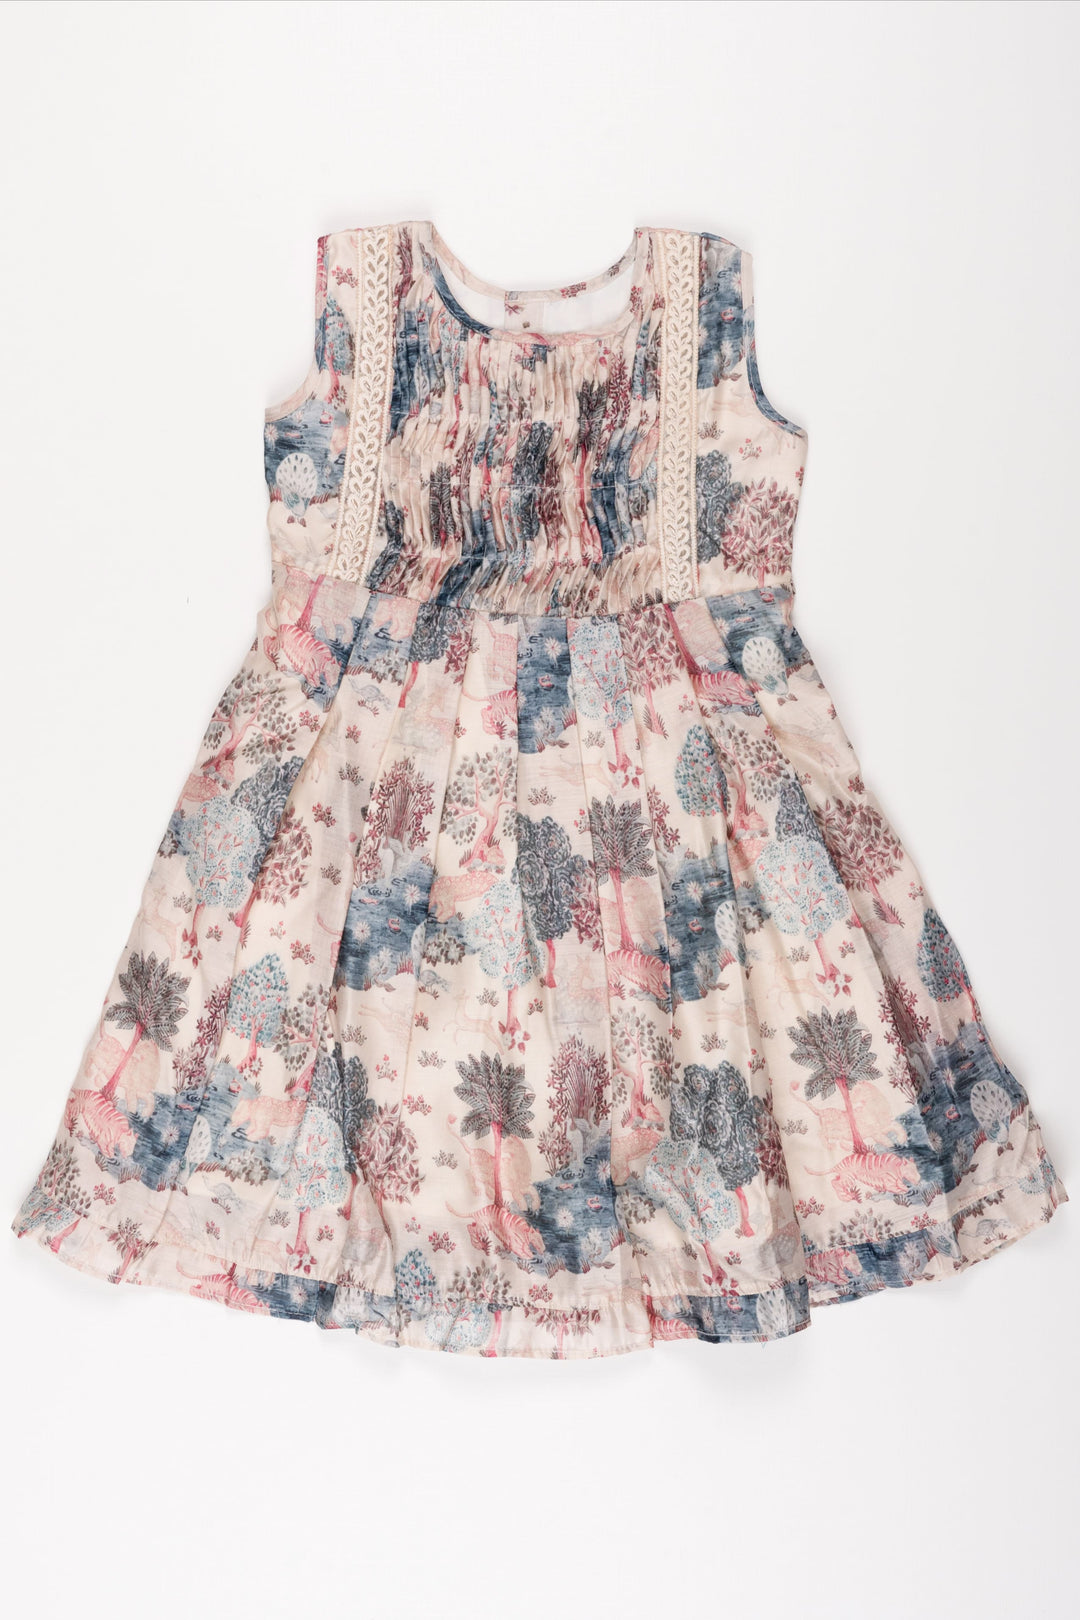 The Nesavu Girls Cotton Frock Rustic Forest Cotton Dress: Vintage-Inspired Botanical Print Frock with Lace Detailing Nesavu 12 (3M) / Half white GFC1196A-12 Girls Vintage Botanical Lace Cotton Dress | Rustic Forest-Inspired Frock | Elegant Playwear | The Nesavu